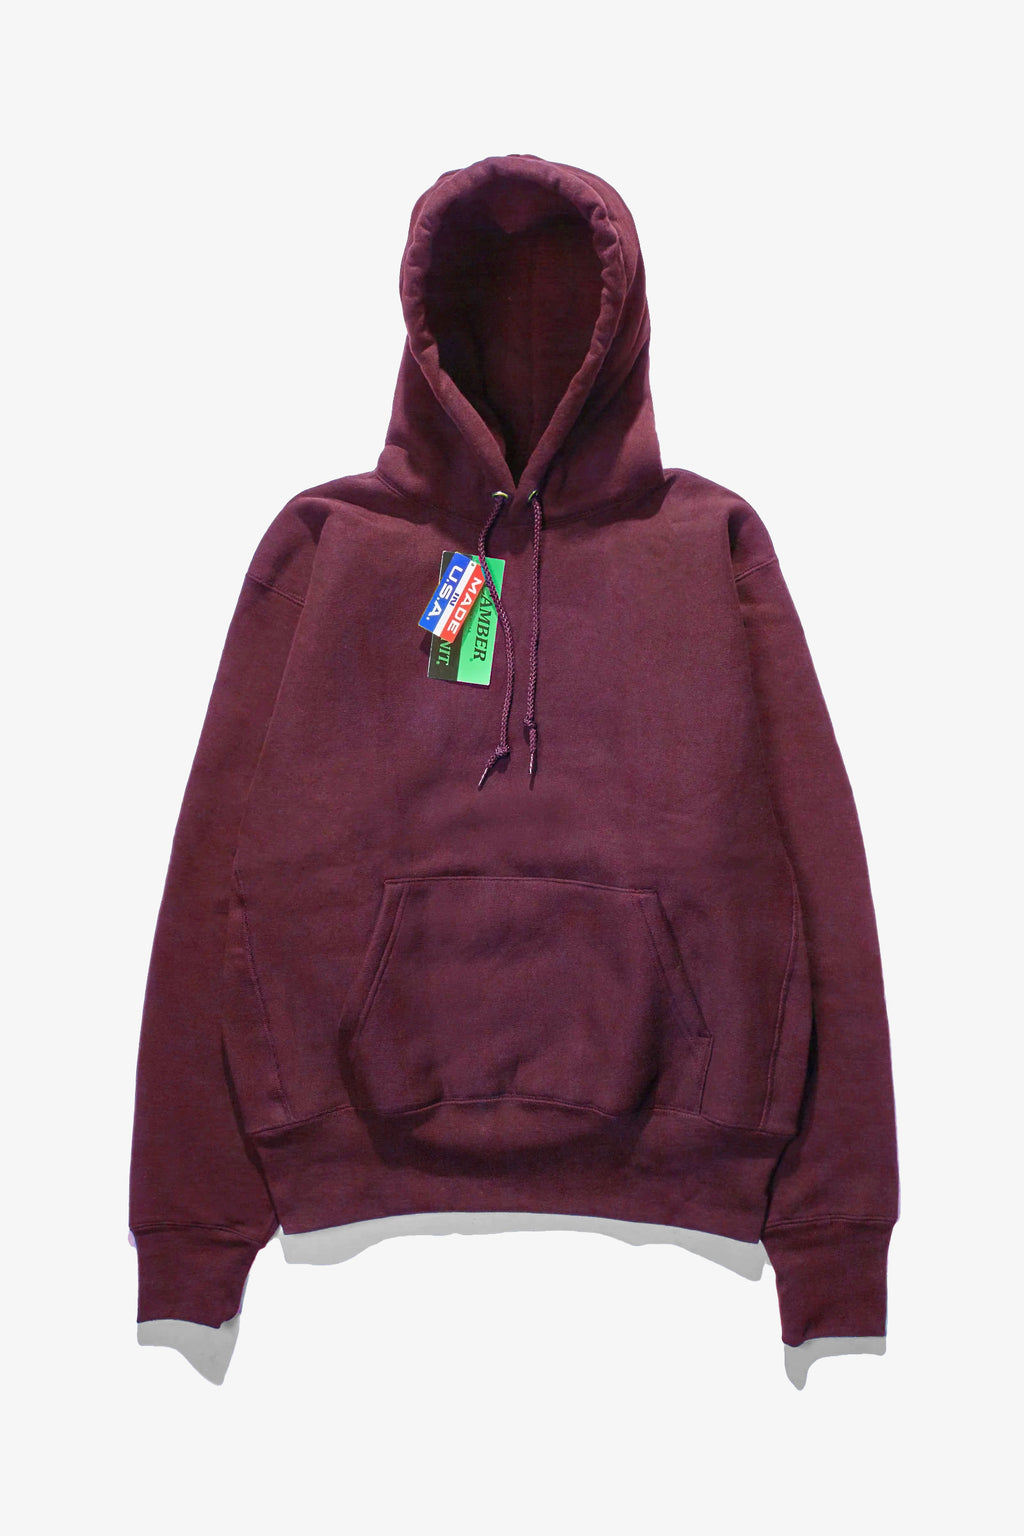 Camber USA - 232 12oz Pullover Hoodie - Burgundy